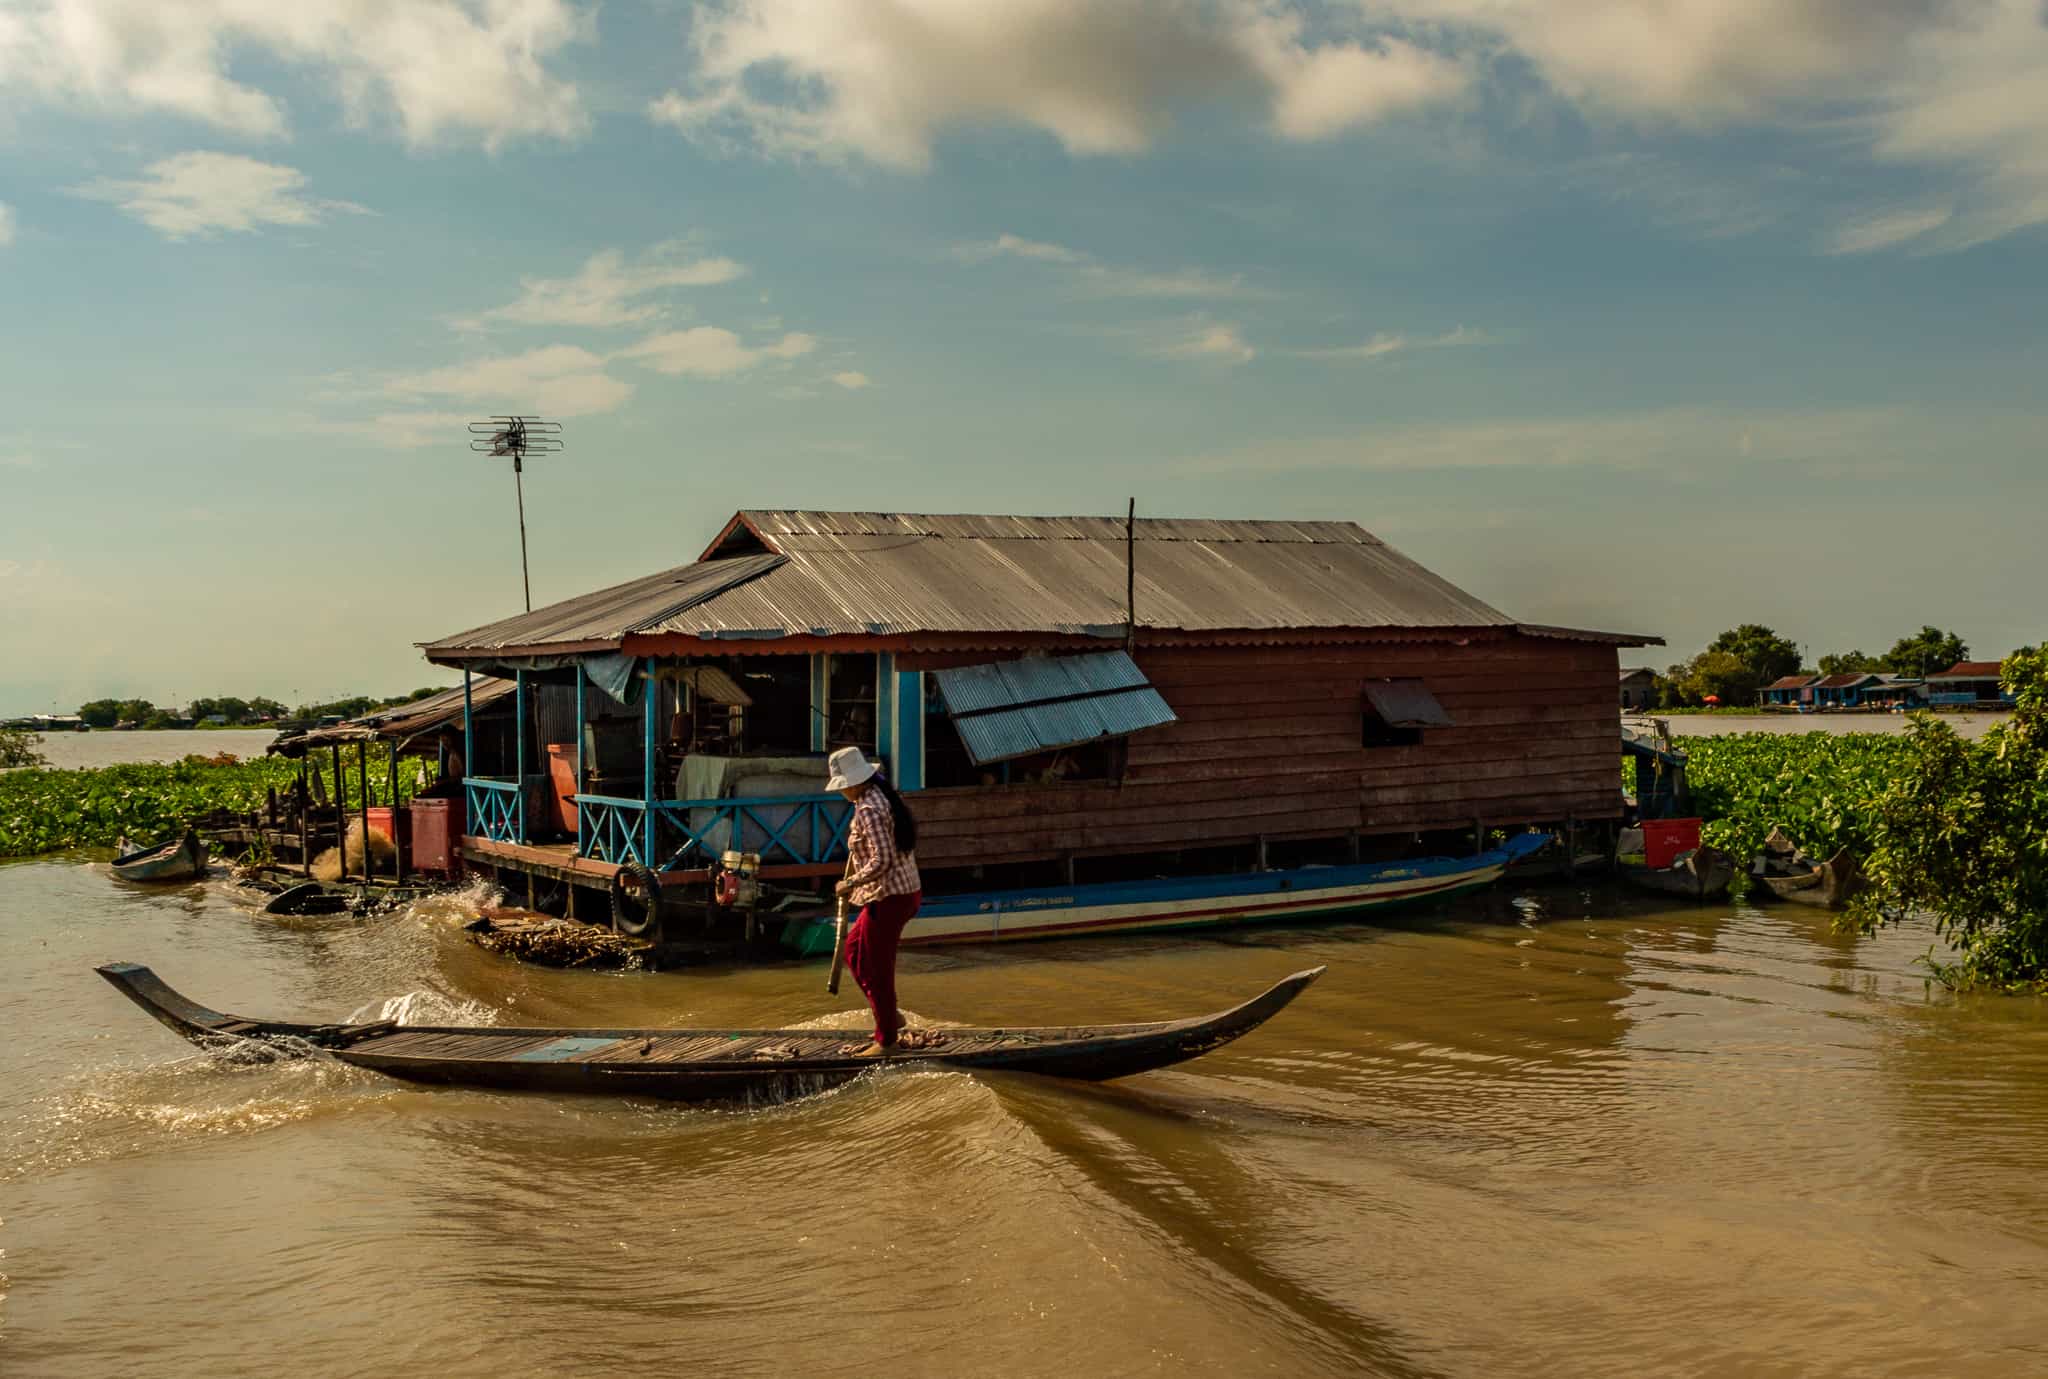 A local of the floating villages of Tonle Sap Lake, Cambodia